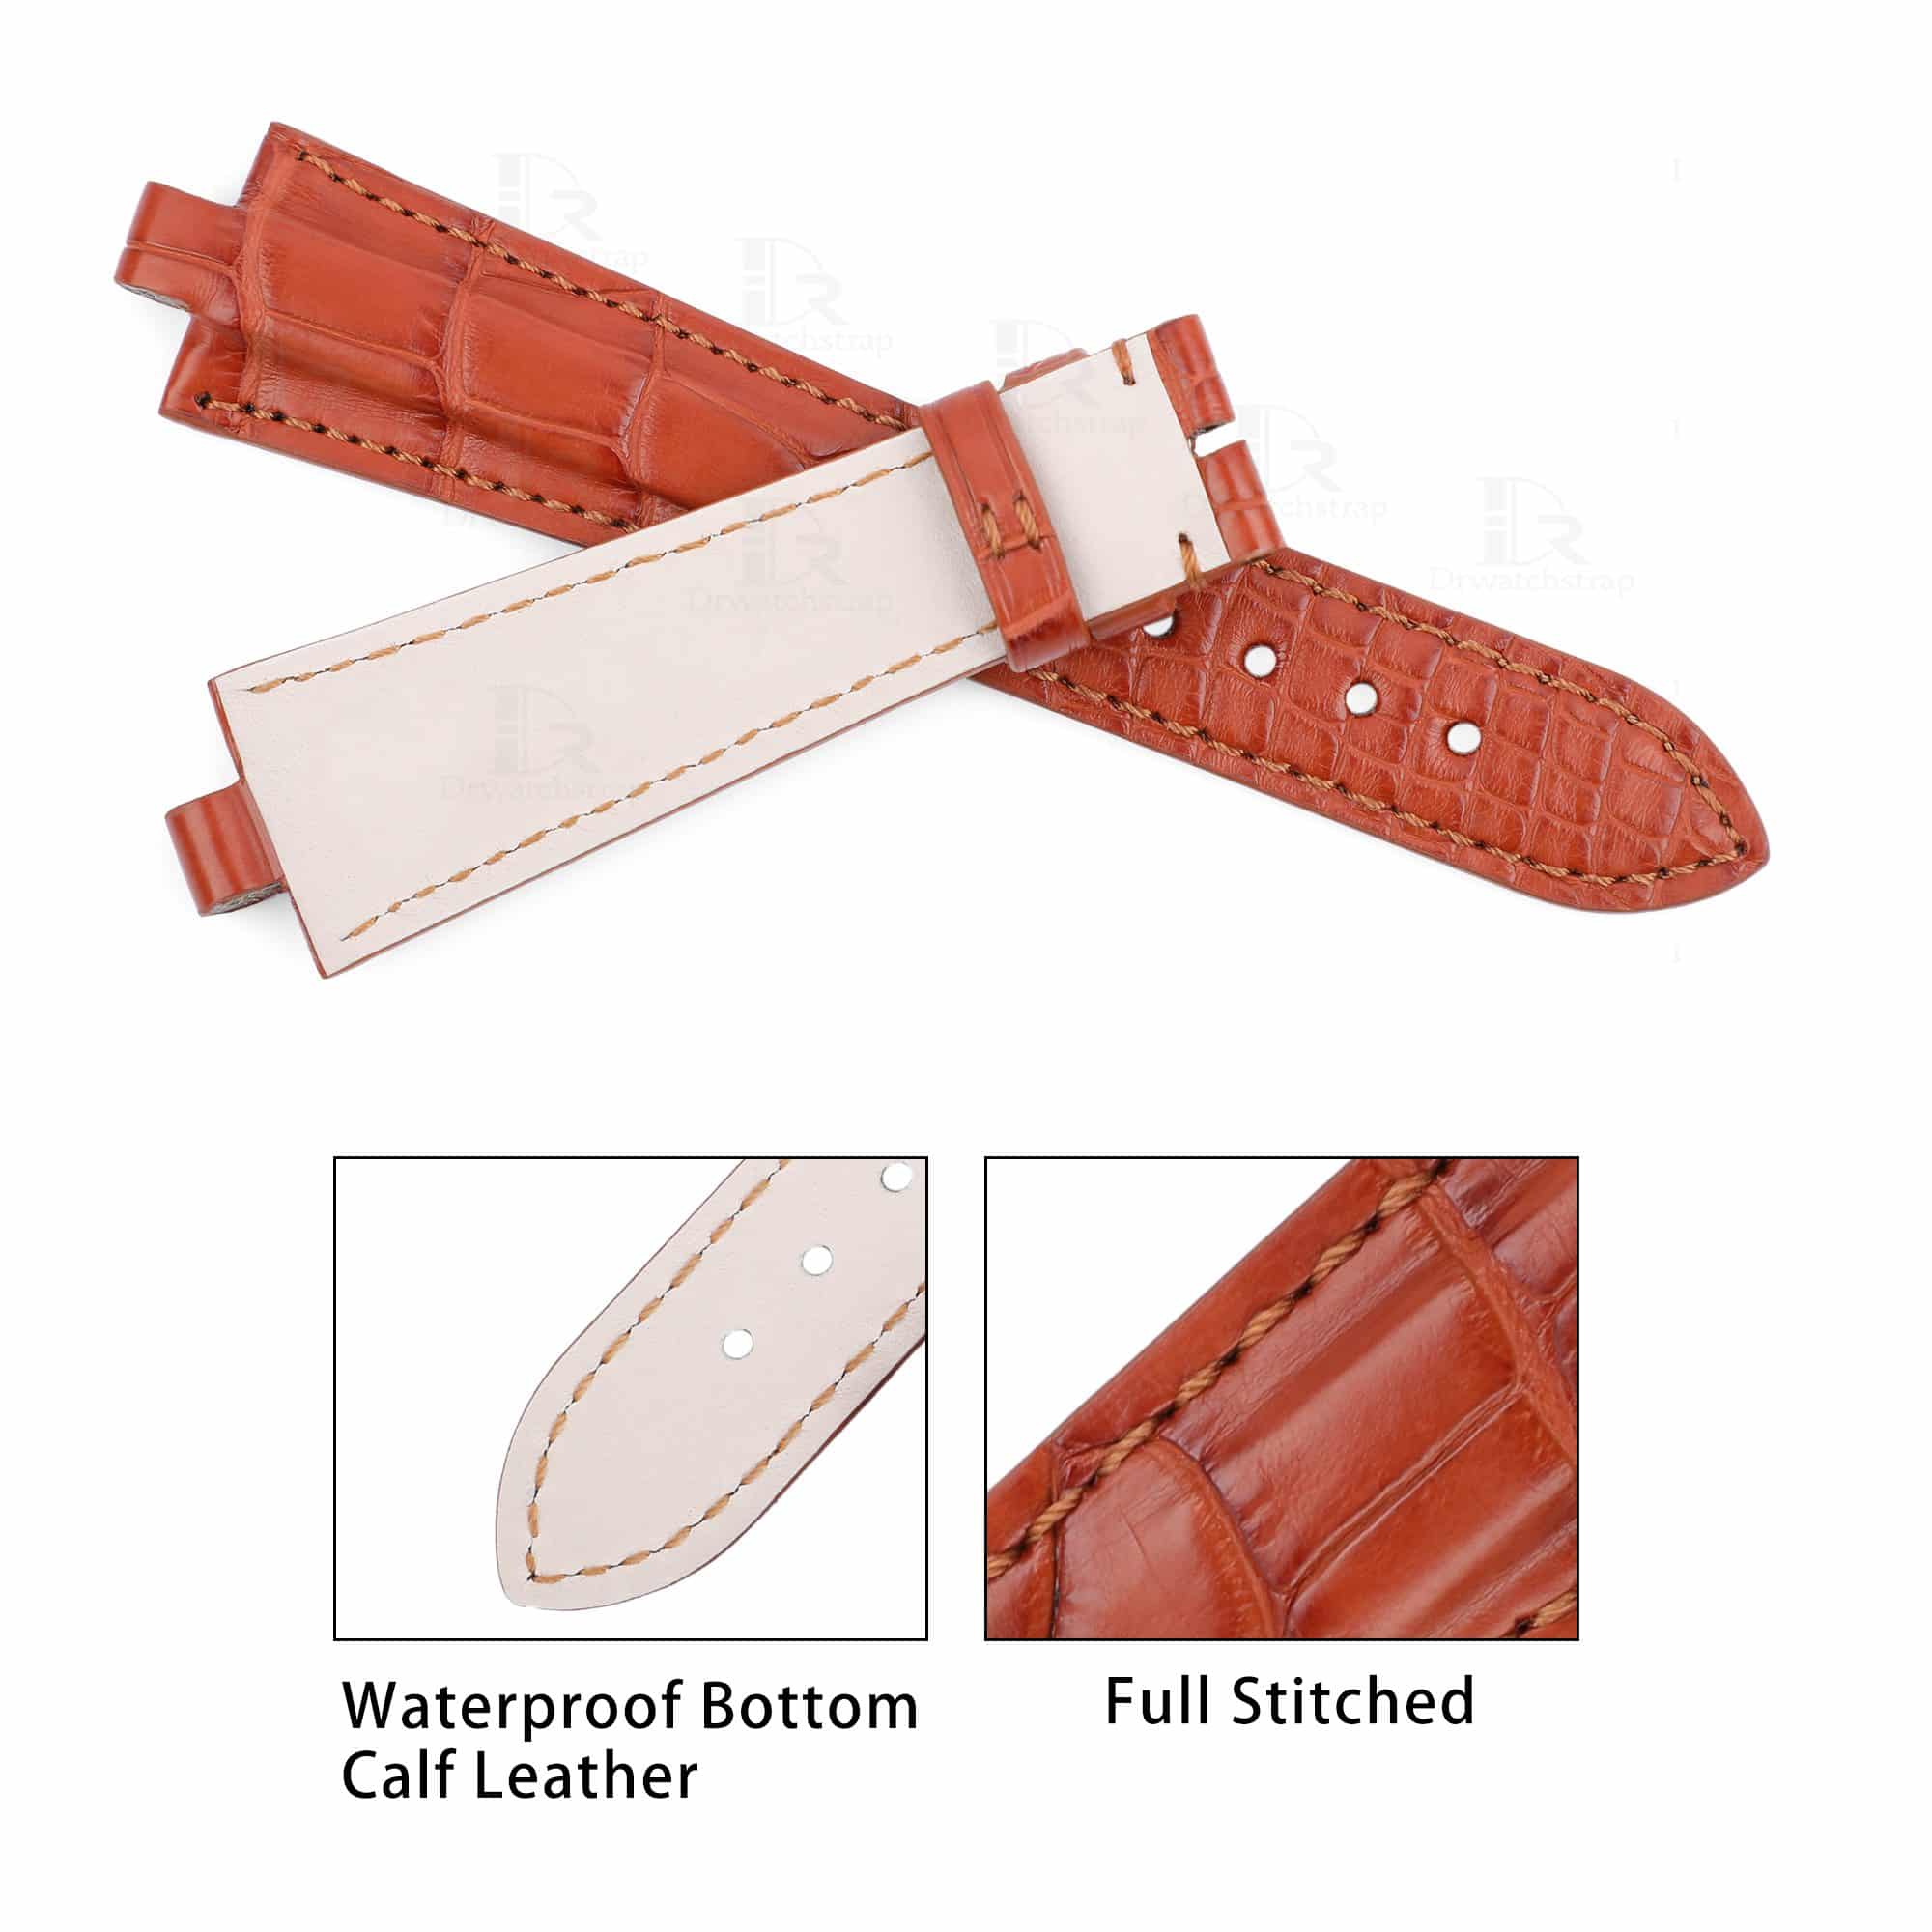 Genuine best quality Belly-scale brown alligator crocodile custom Bvlgari leather watch strap & watch band replacement for Bvlgari Diagono Aluminium AL38A L3276 mens and women's luxury watch - OEM aftermarket high-end straps and watch bands online at a low price from dr watchstrap